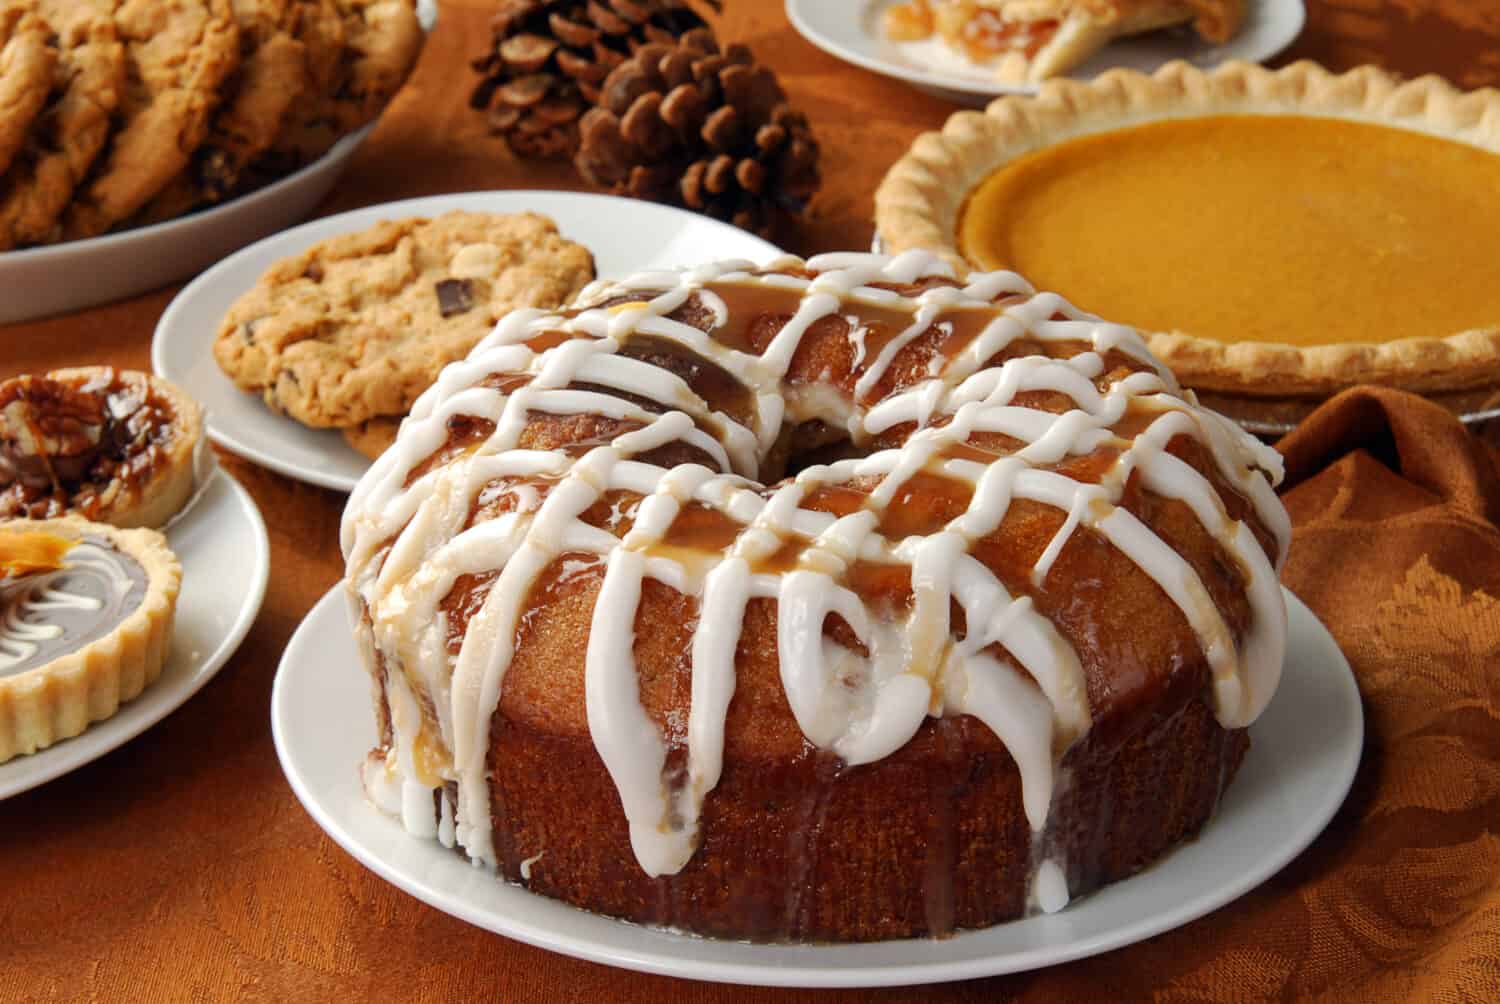 An apple bundt cake with caramel glaze and frosting and other holiday treats